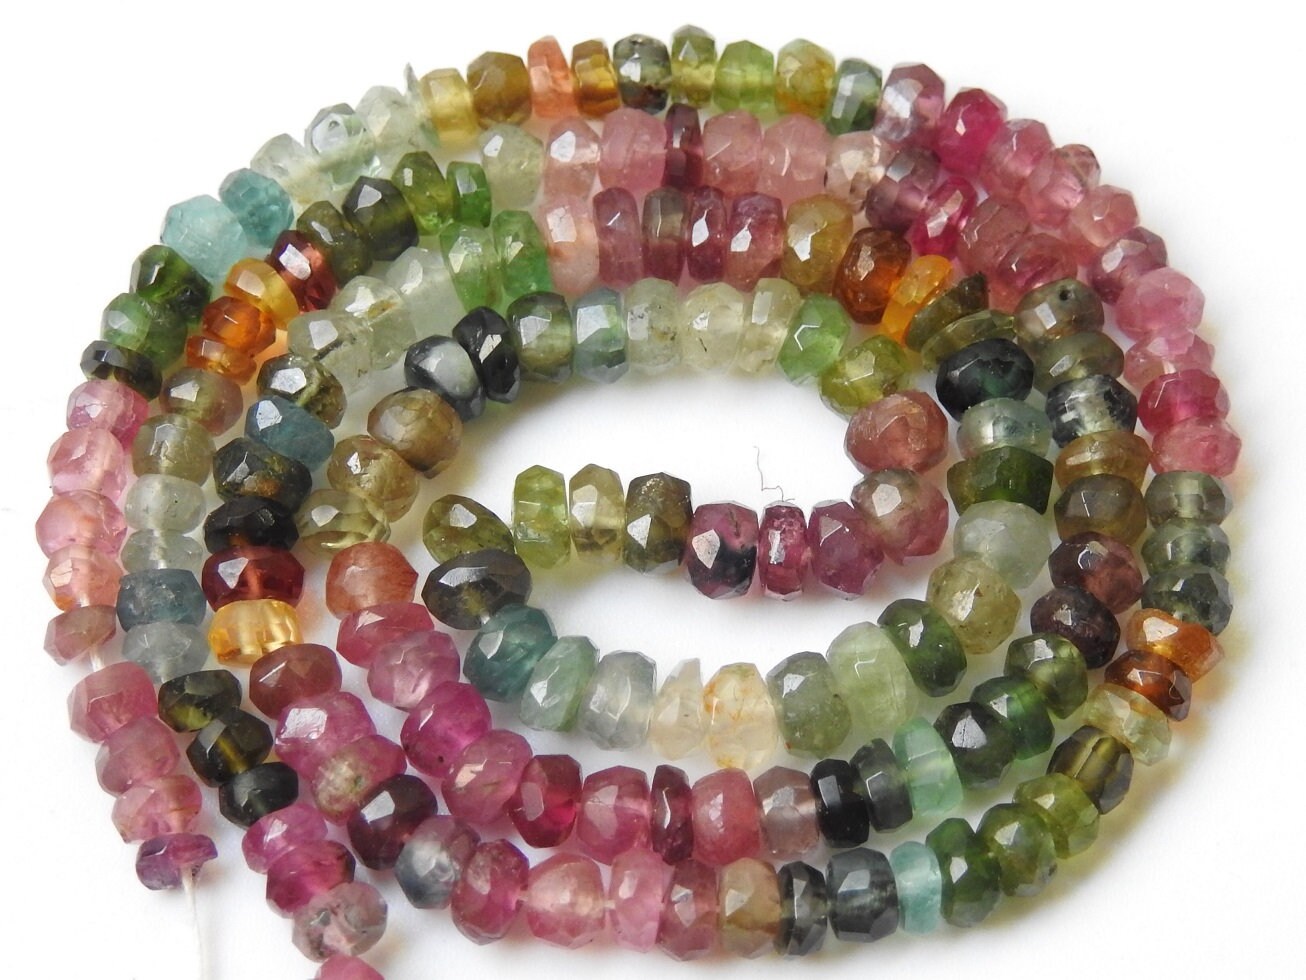 Tourmaline Faceted Roundel Bead,Multi Shaded,Loose Stone,Handmade,Necklace,Wholesaler,Supplies,New Arrival 100%Natural PME(B13) | Save 33% - Rajasthan Living 14